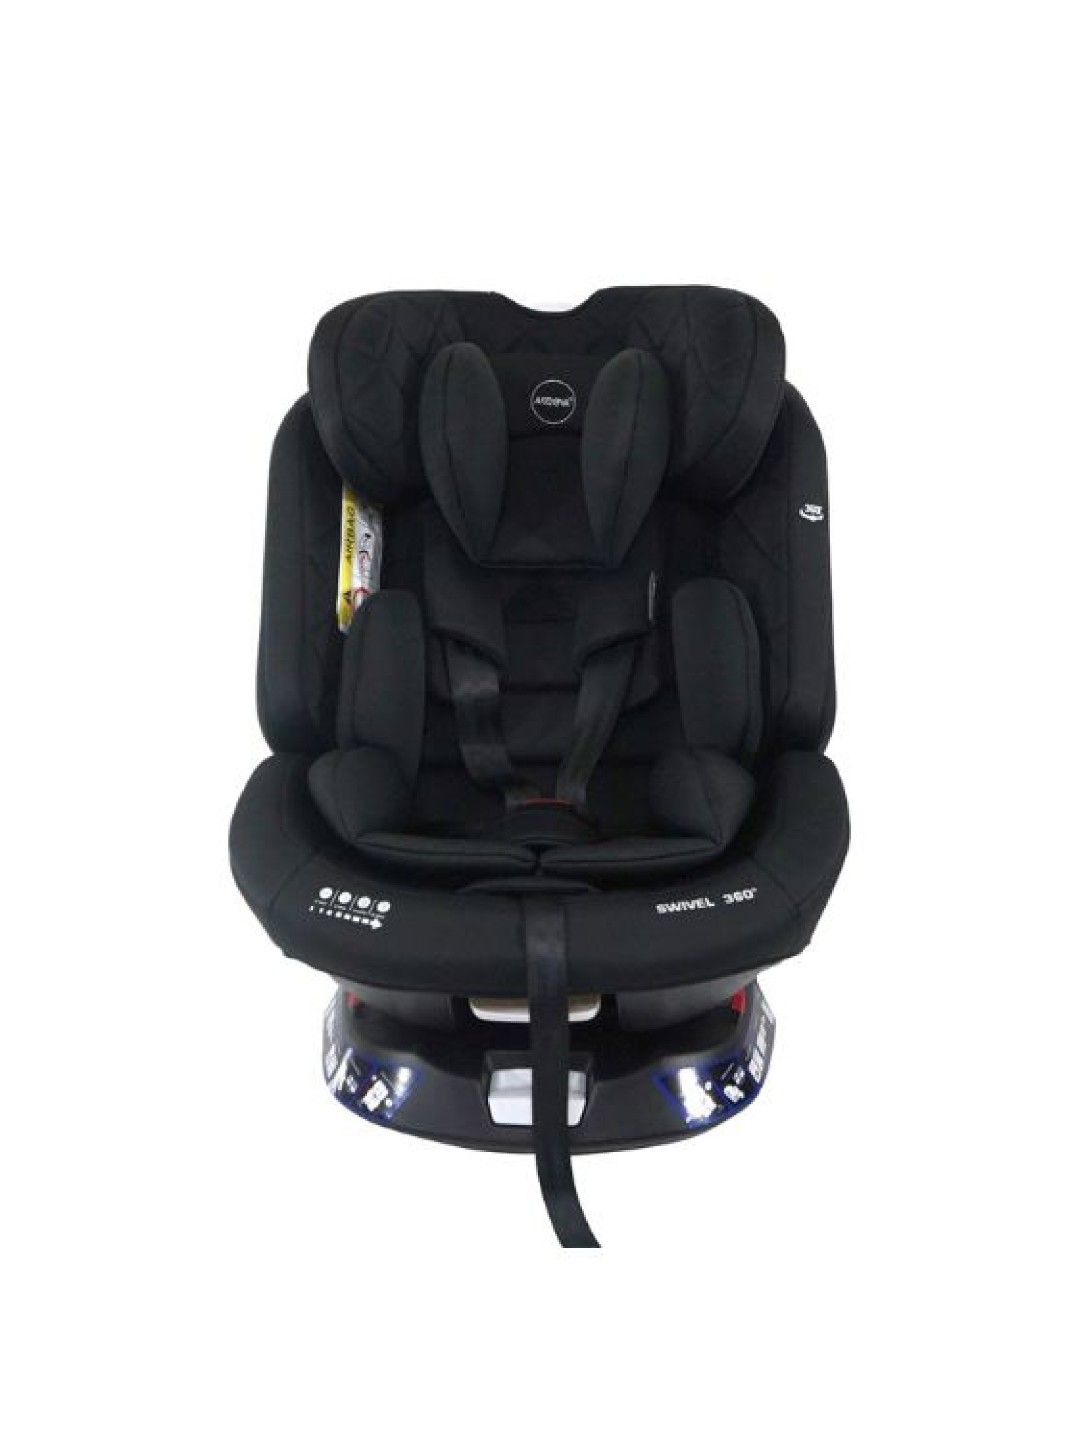 Akeeva 360 Rotate Isofix Carseat w/ Latch and Side Protect (Swivel) w/ ICC - Black